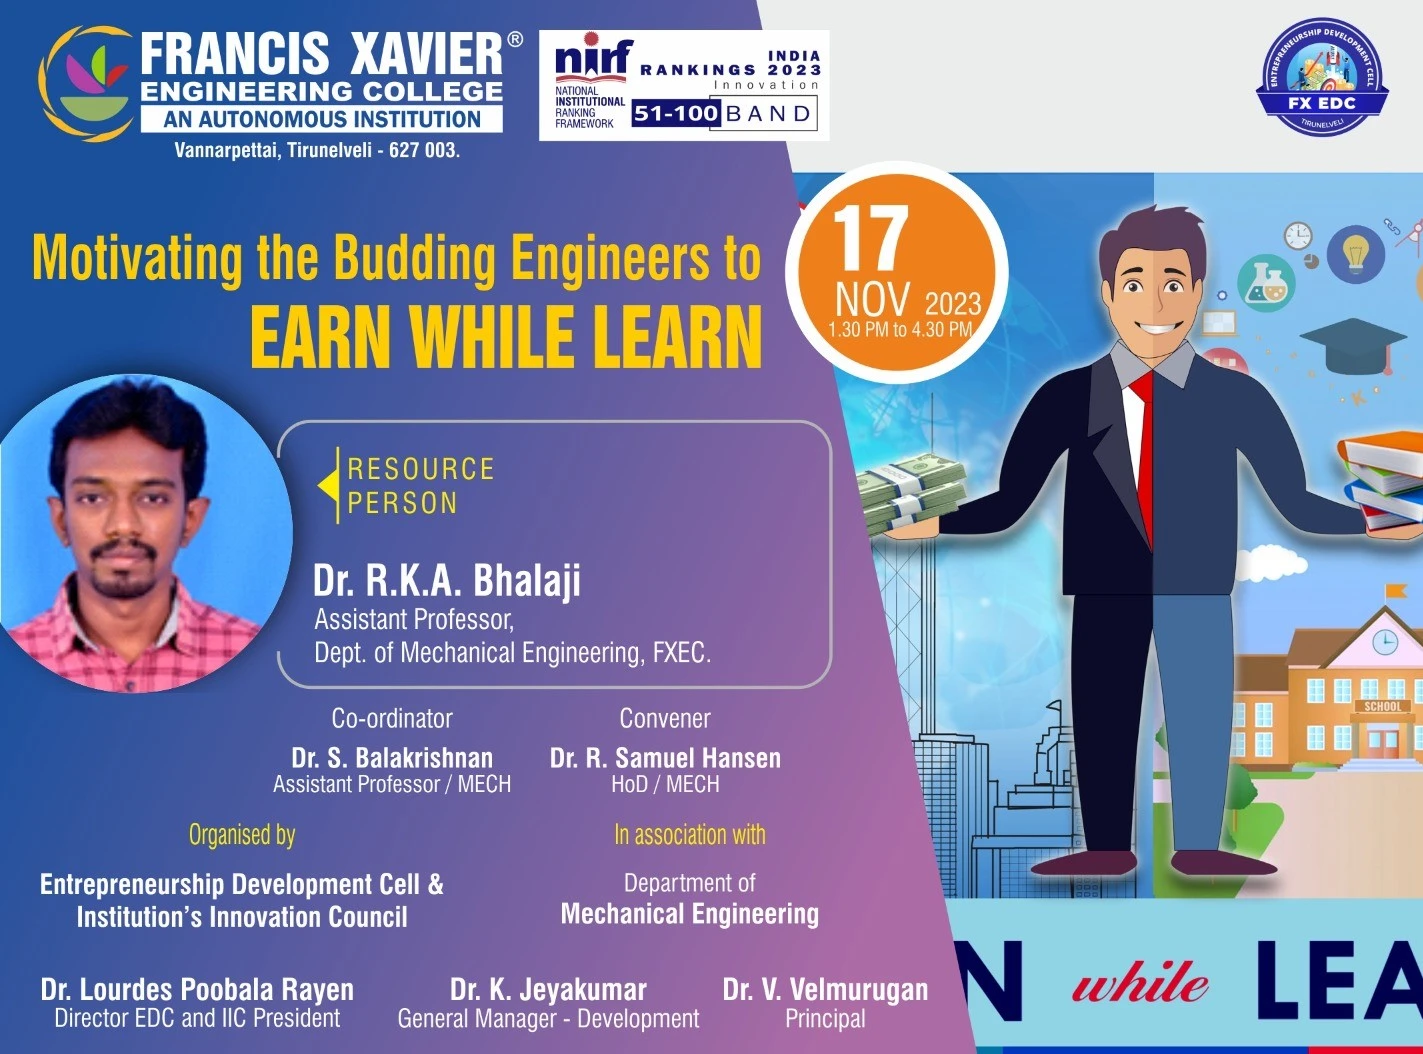 Motivating the Budding Engineers to earn while learn